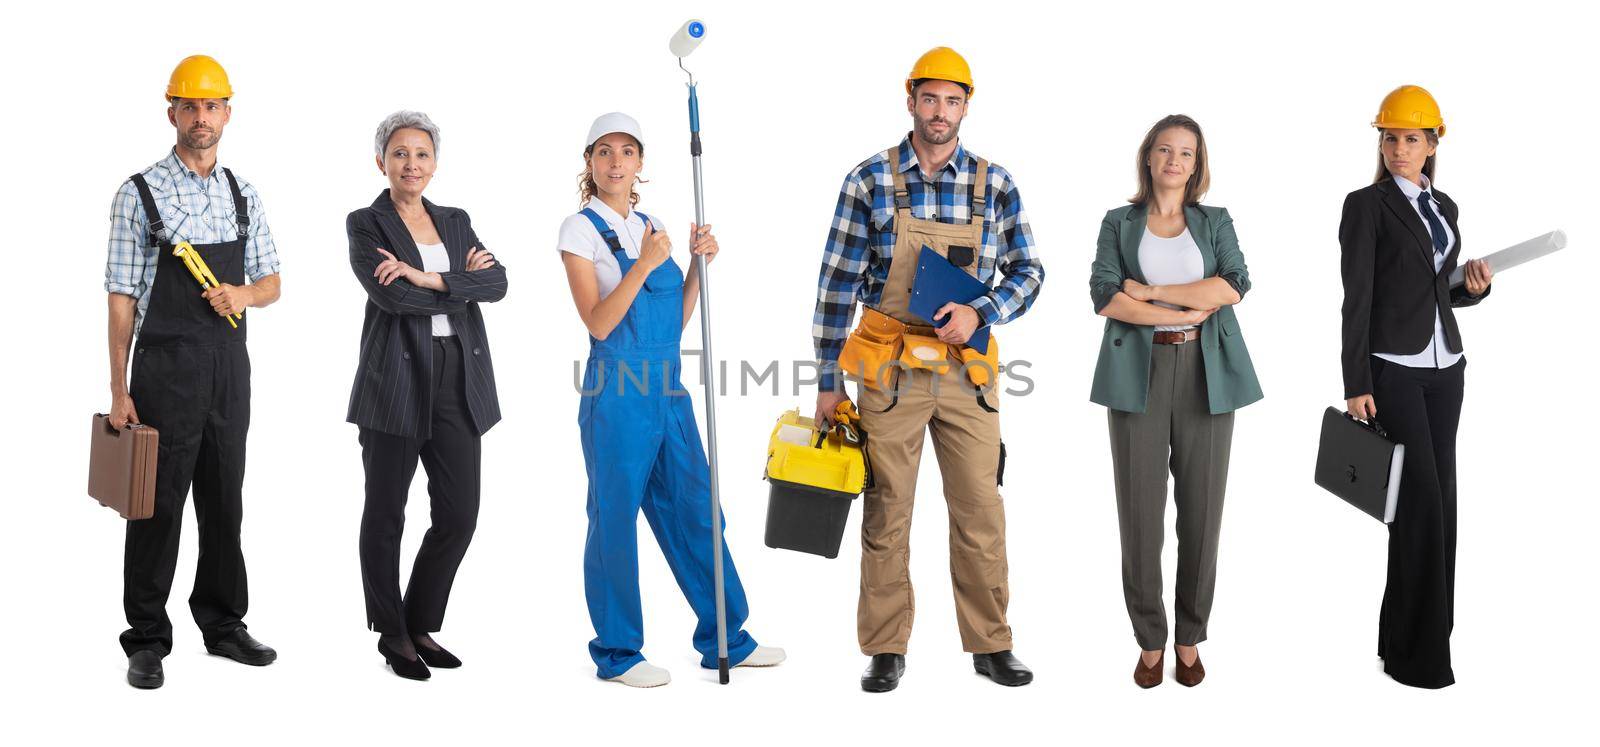 Collection of portraits of construction workers and managers, studio isolated on white background